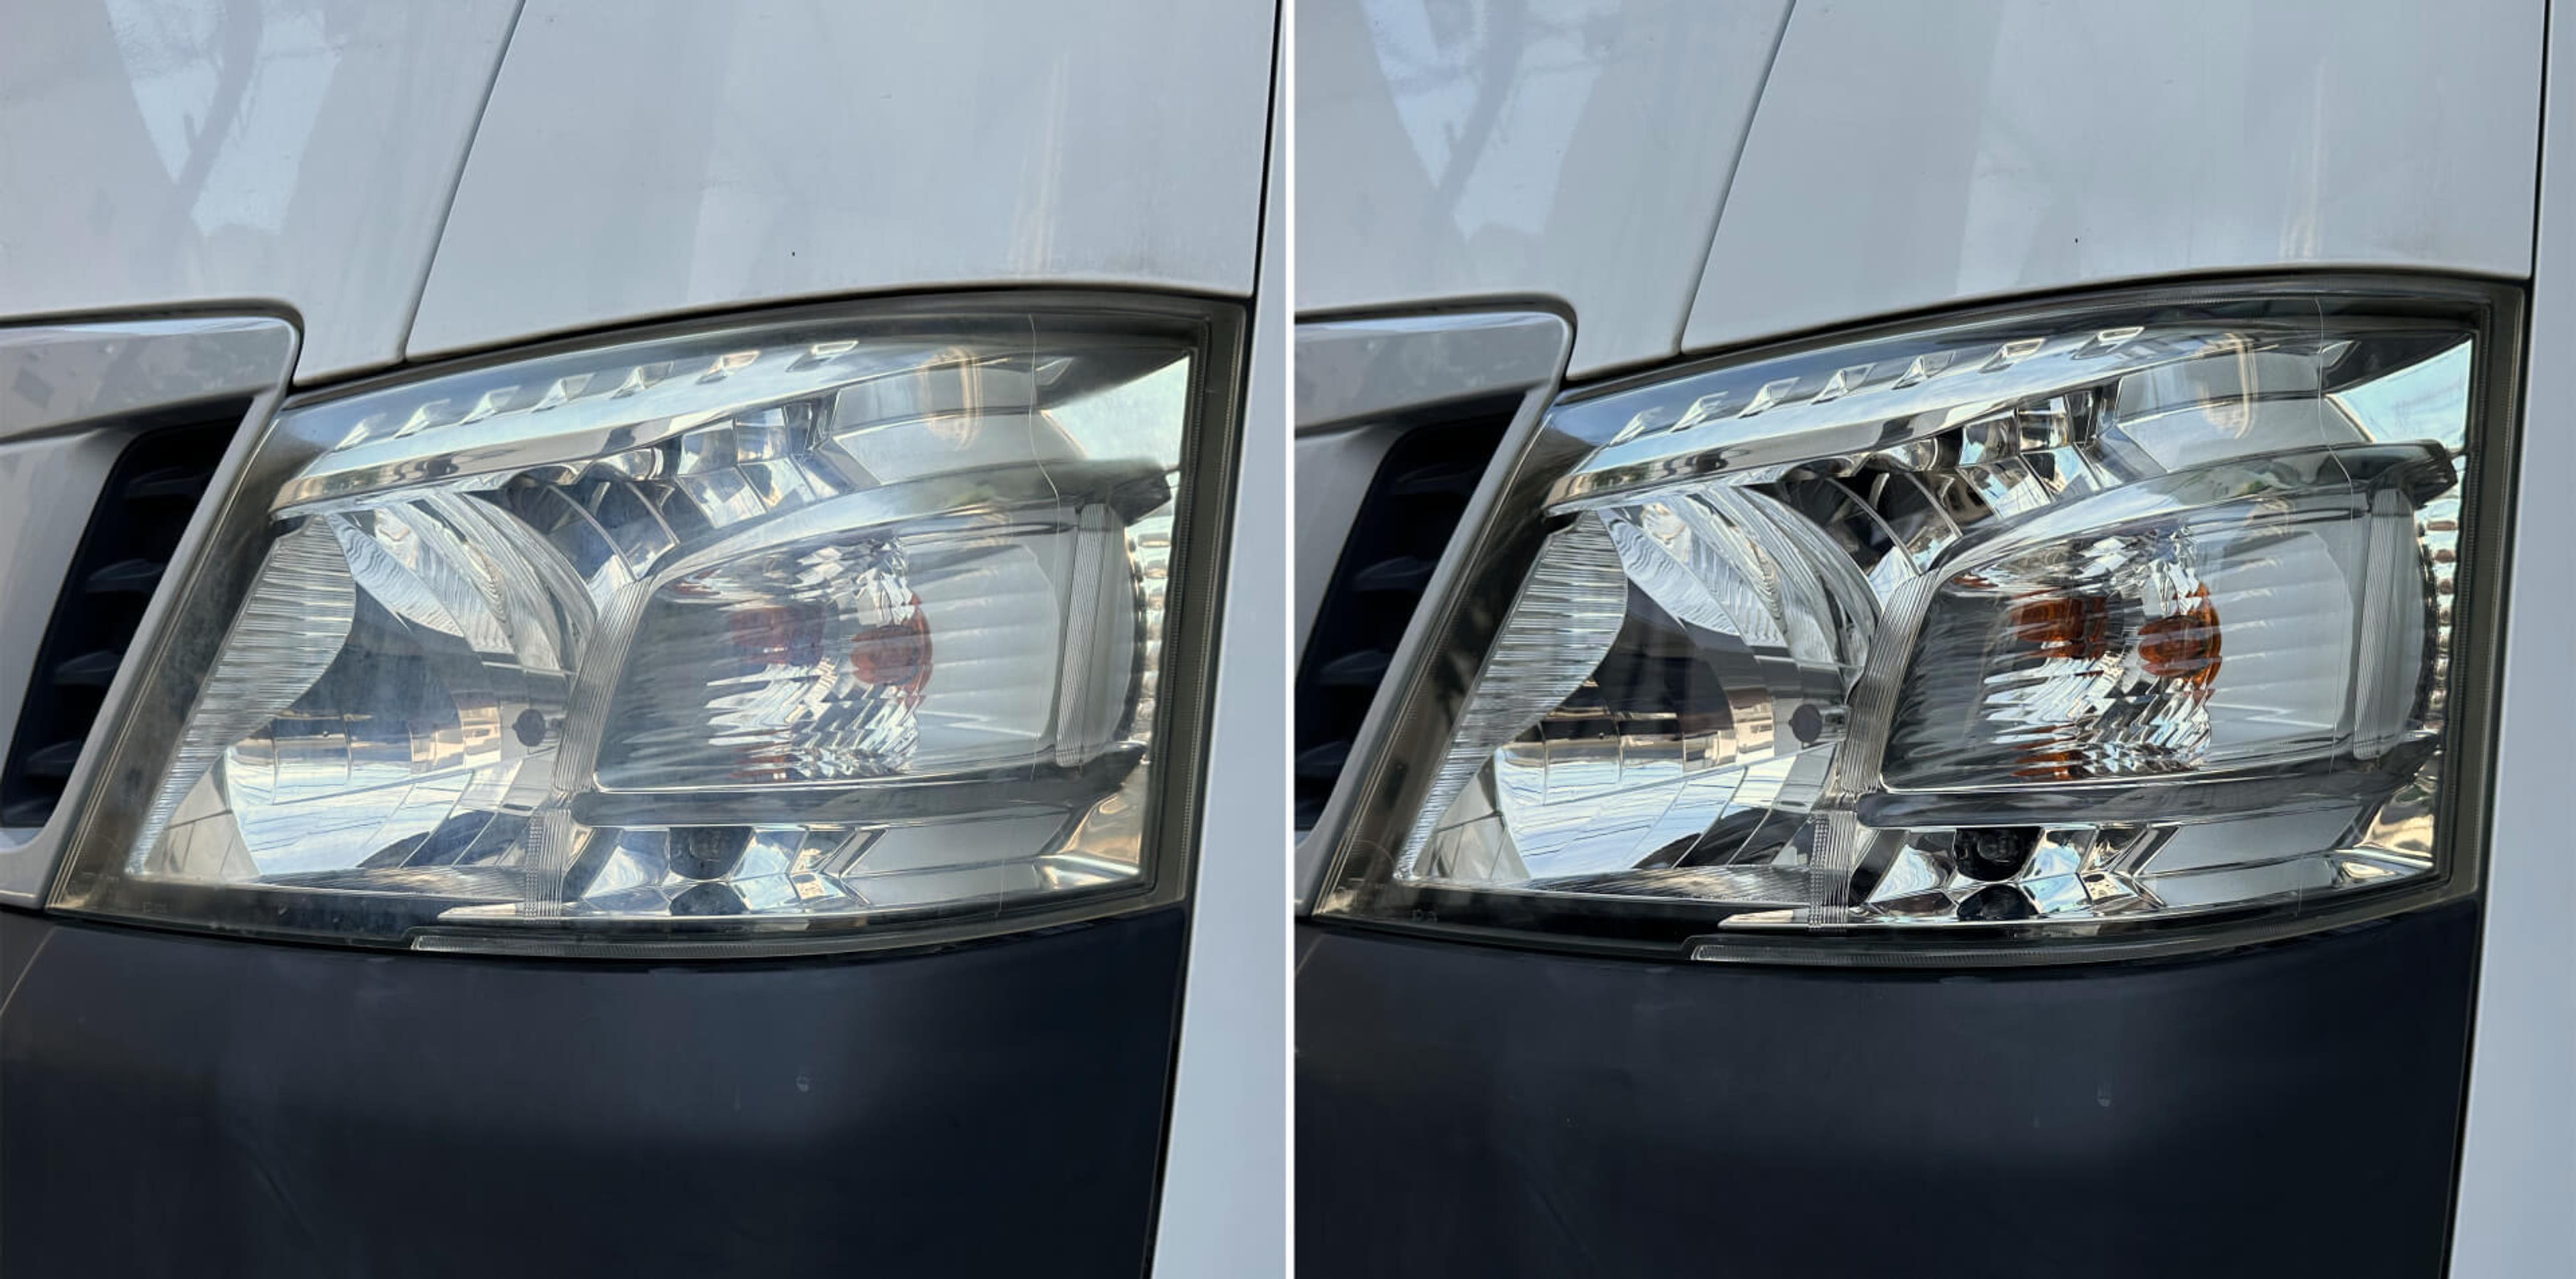 before and after cleaning headlights